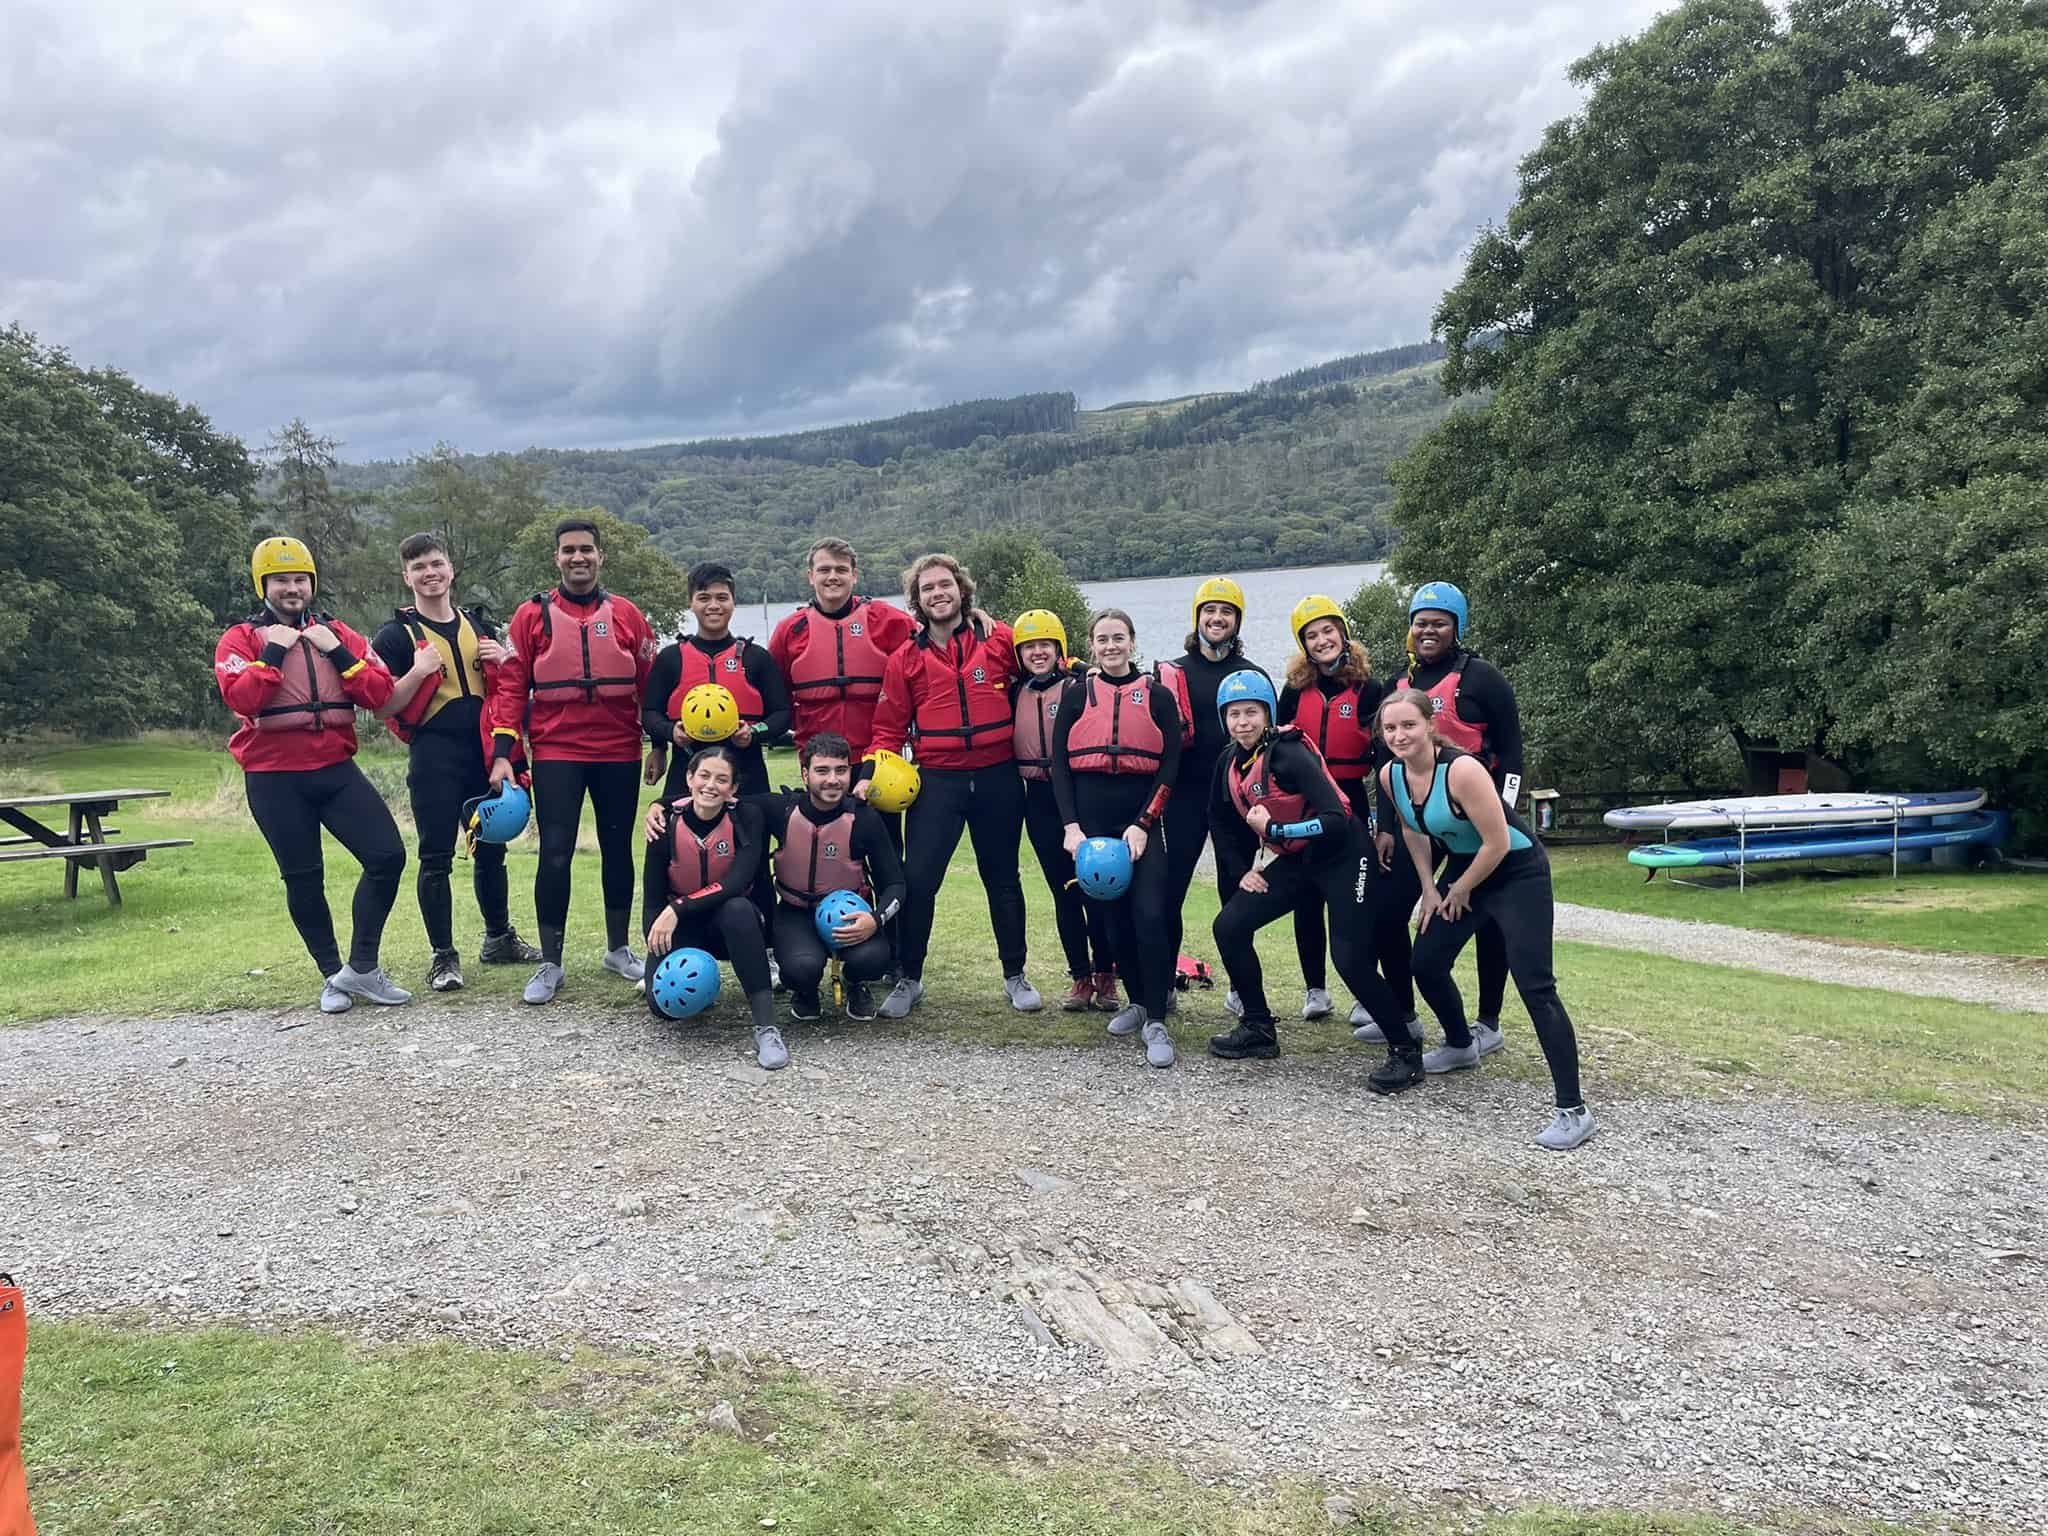 The 2021 cohort are in water sports kit standing in front of Lake Coniston